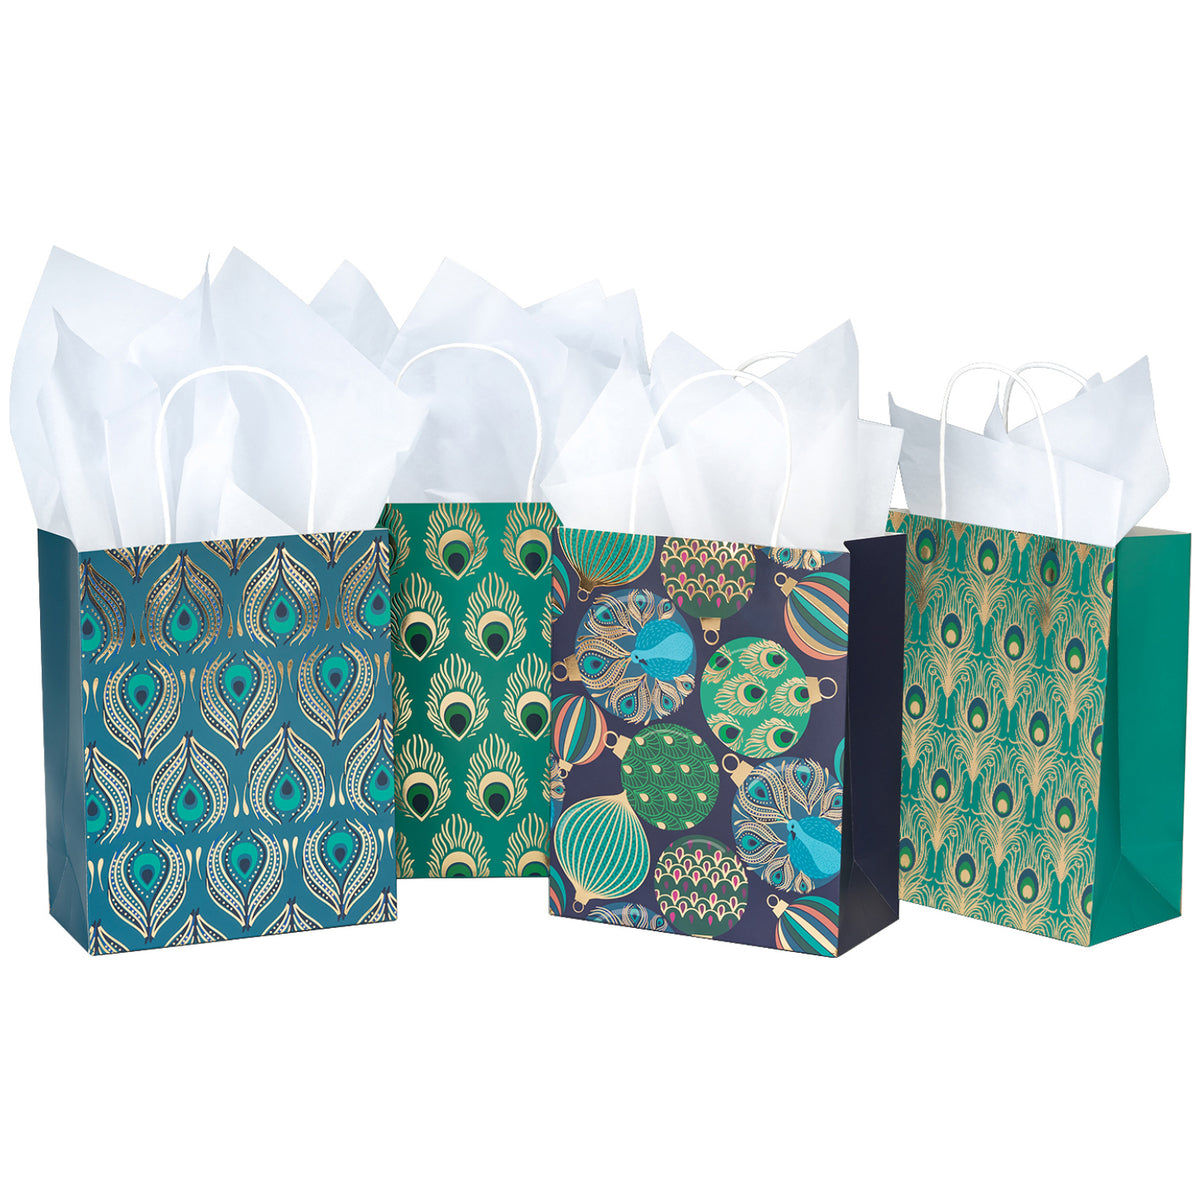 IG Design Solid Gift Tissue Sheets - Turquoise, 8 ct